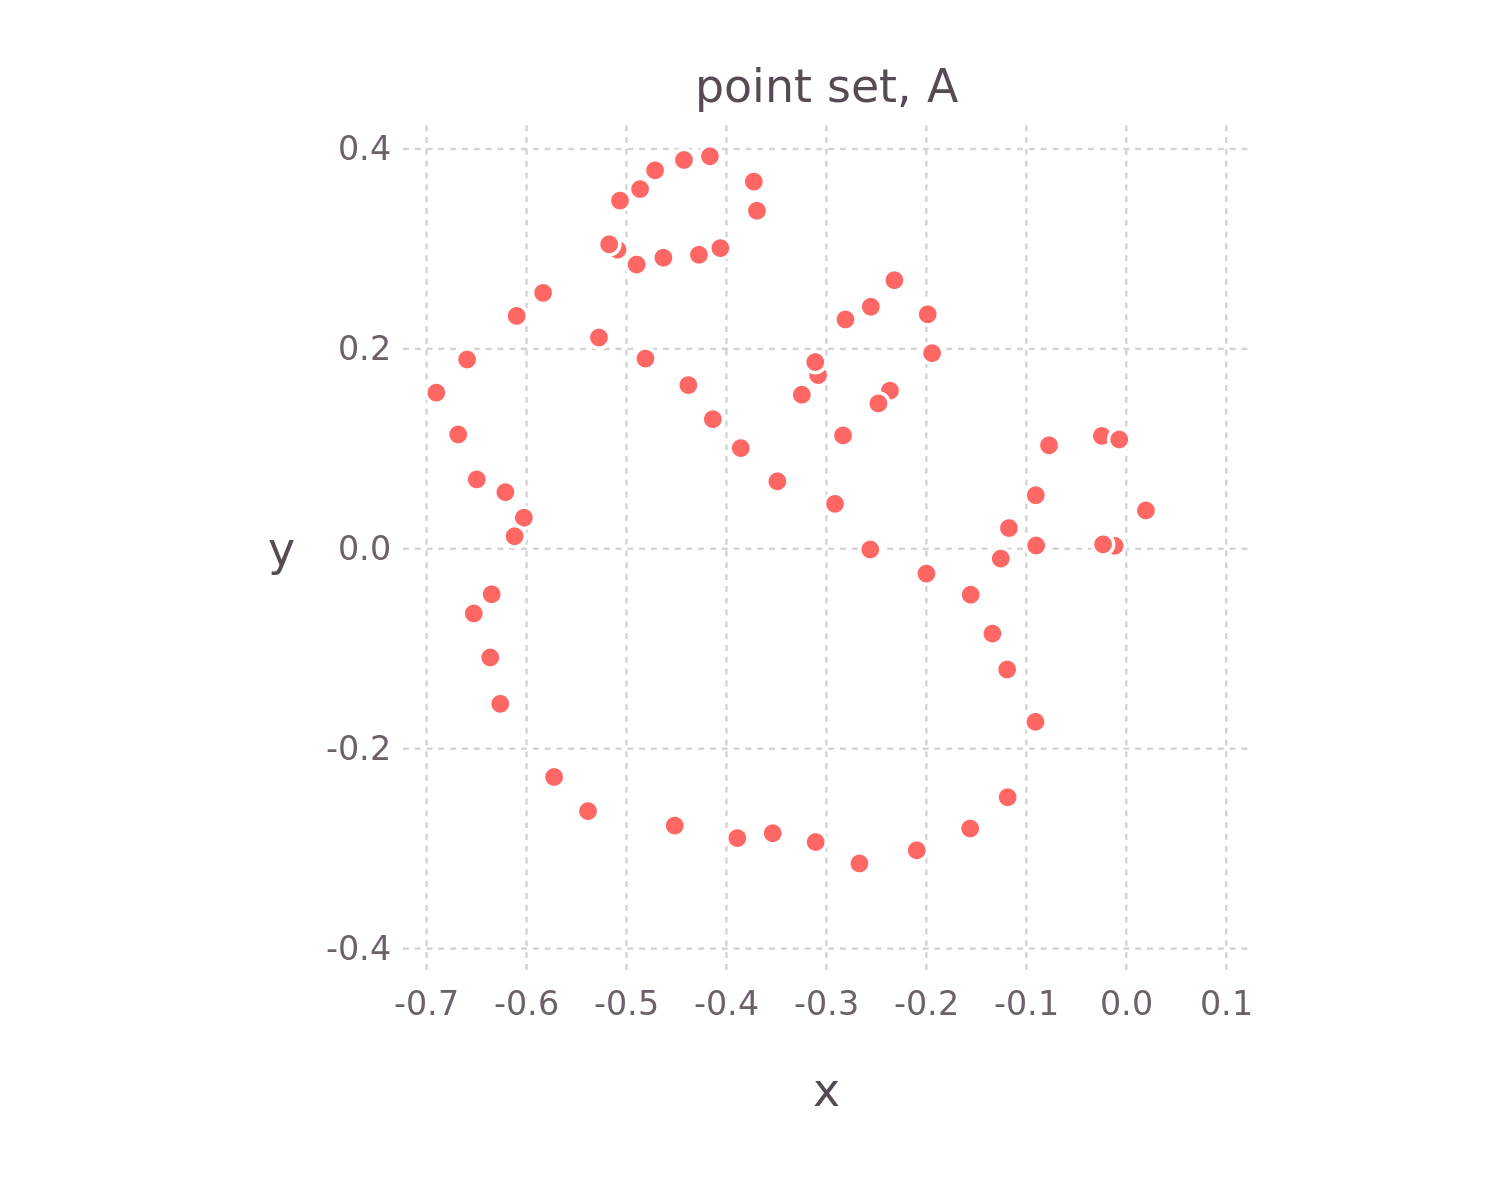 Point set $\mathcal{A}$ was obtained by rotating each point in the set $\mathcal{B}$ about the origin and adding independent, identically-distributed Gaussian noise to their coordinates.